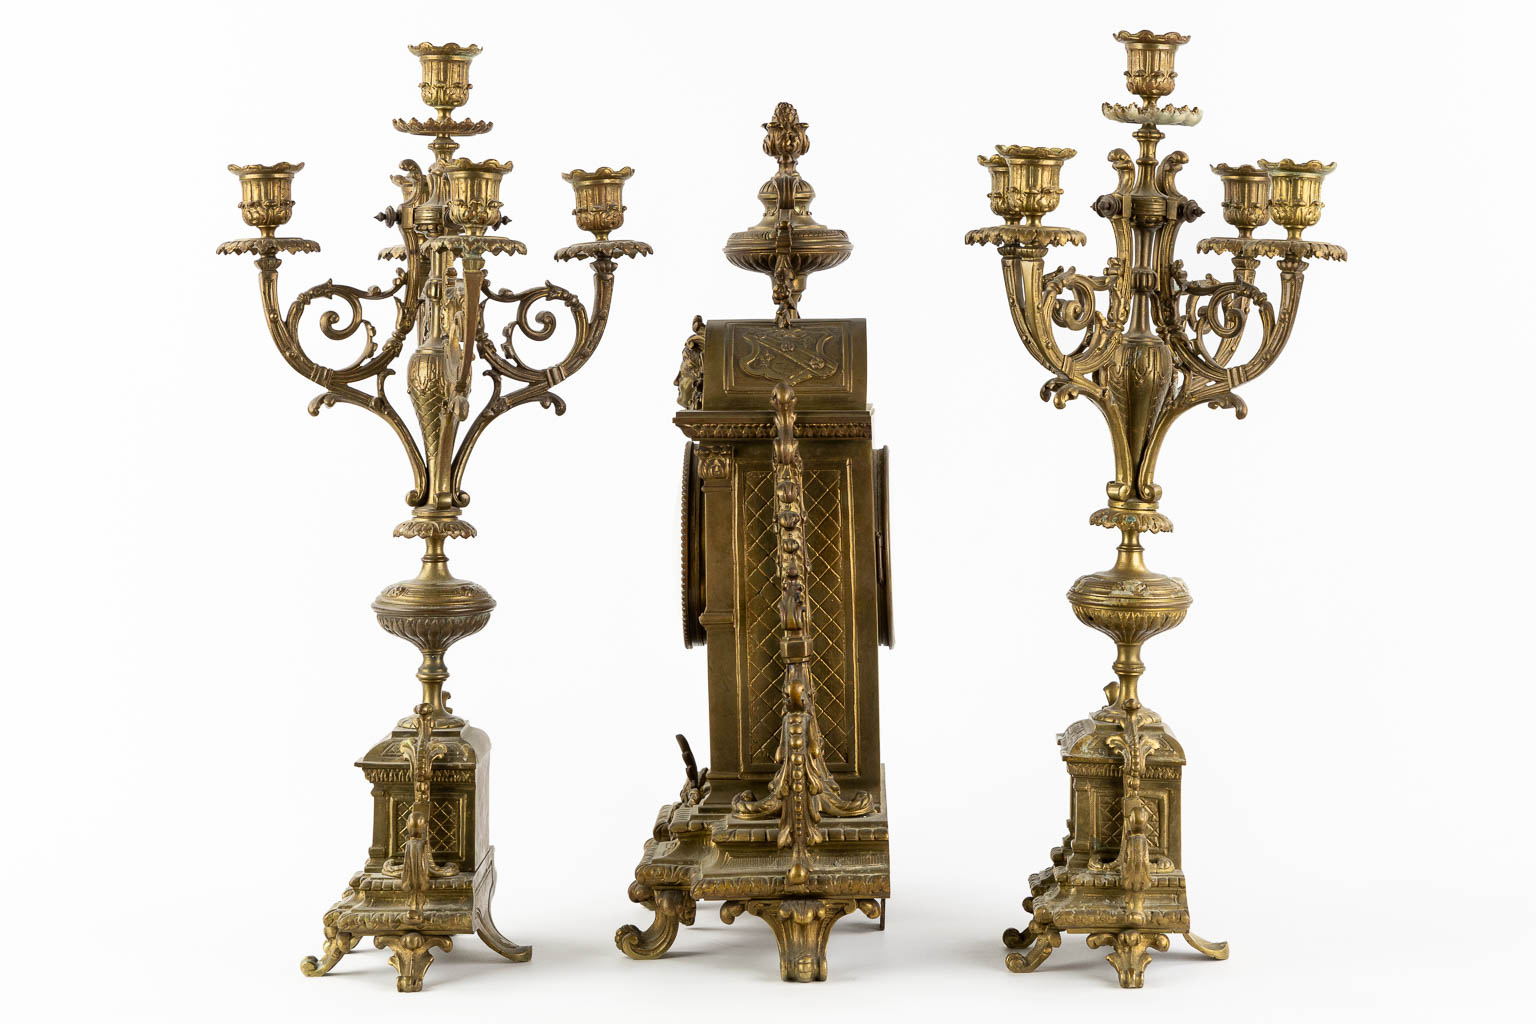 A three-piece mantle garniture clock and candelabra, patinated bronze. (L:16 x W:33 x H:50 cm) - Image 8 of 13